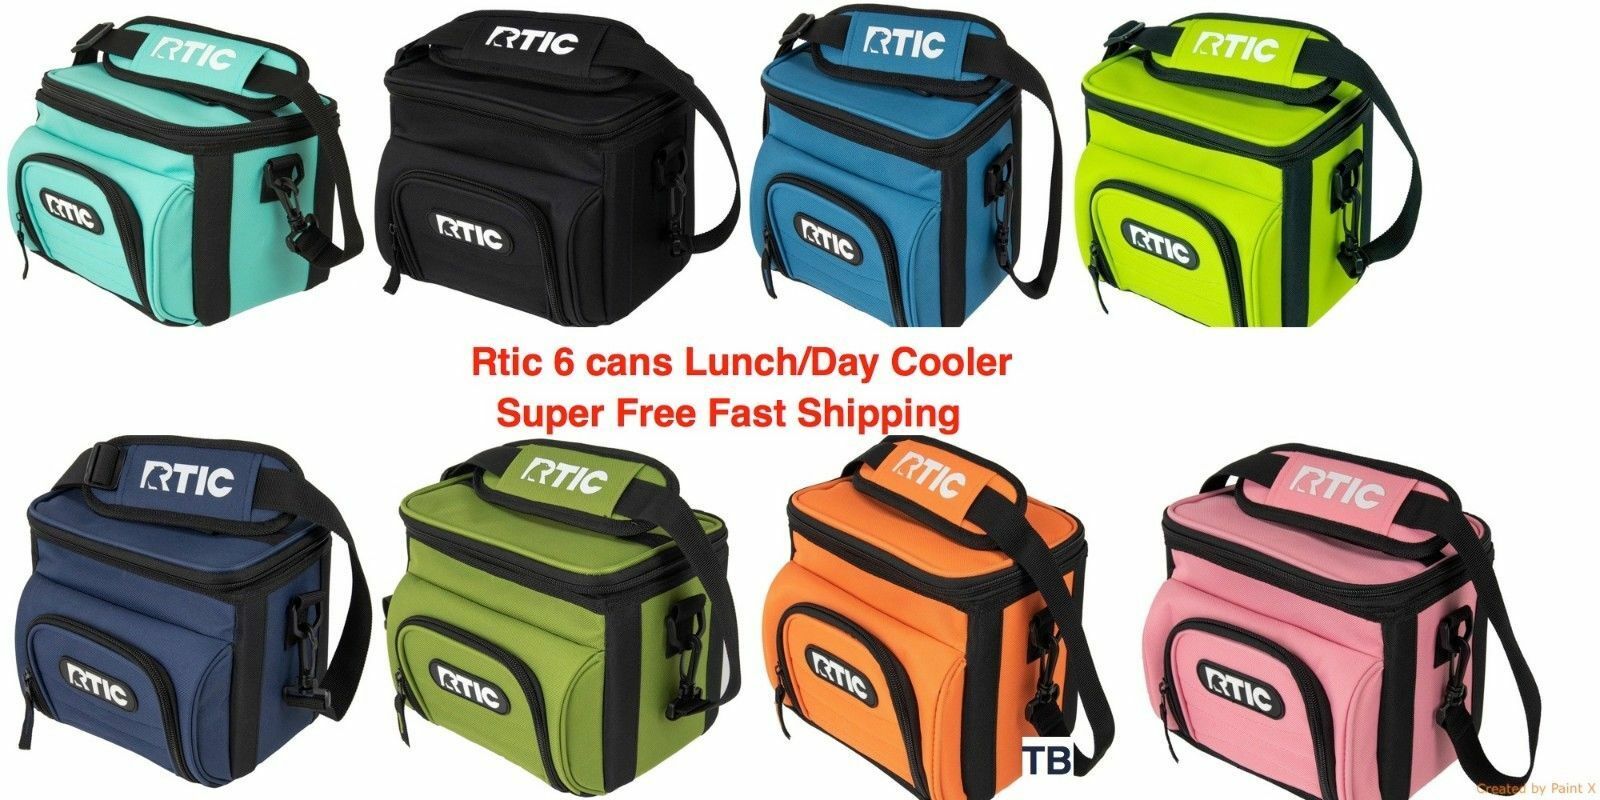 Rtic 6 8 15 28 Can Day Cooler New Lunchbox Soft Pack 24 Hours Cold Lunch Box